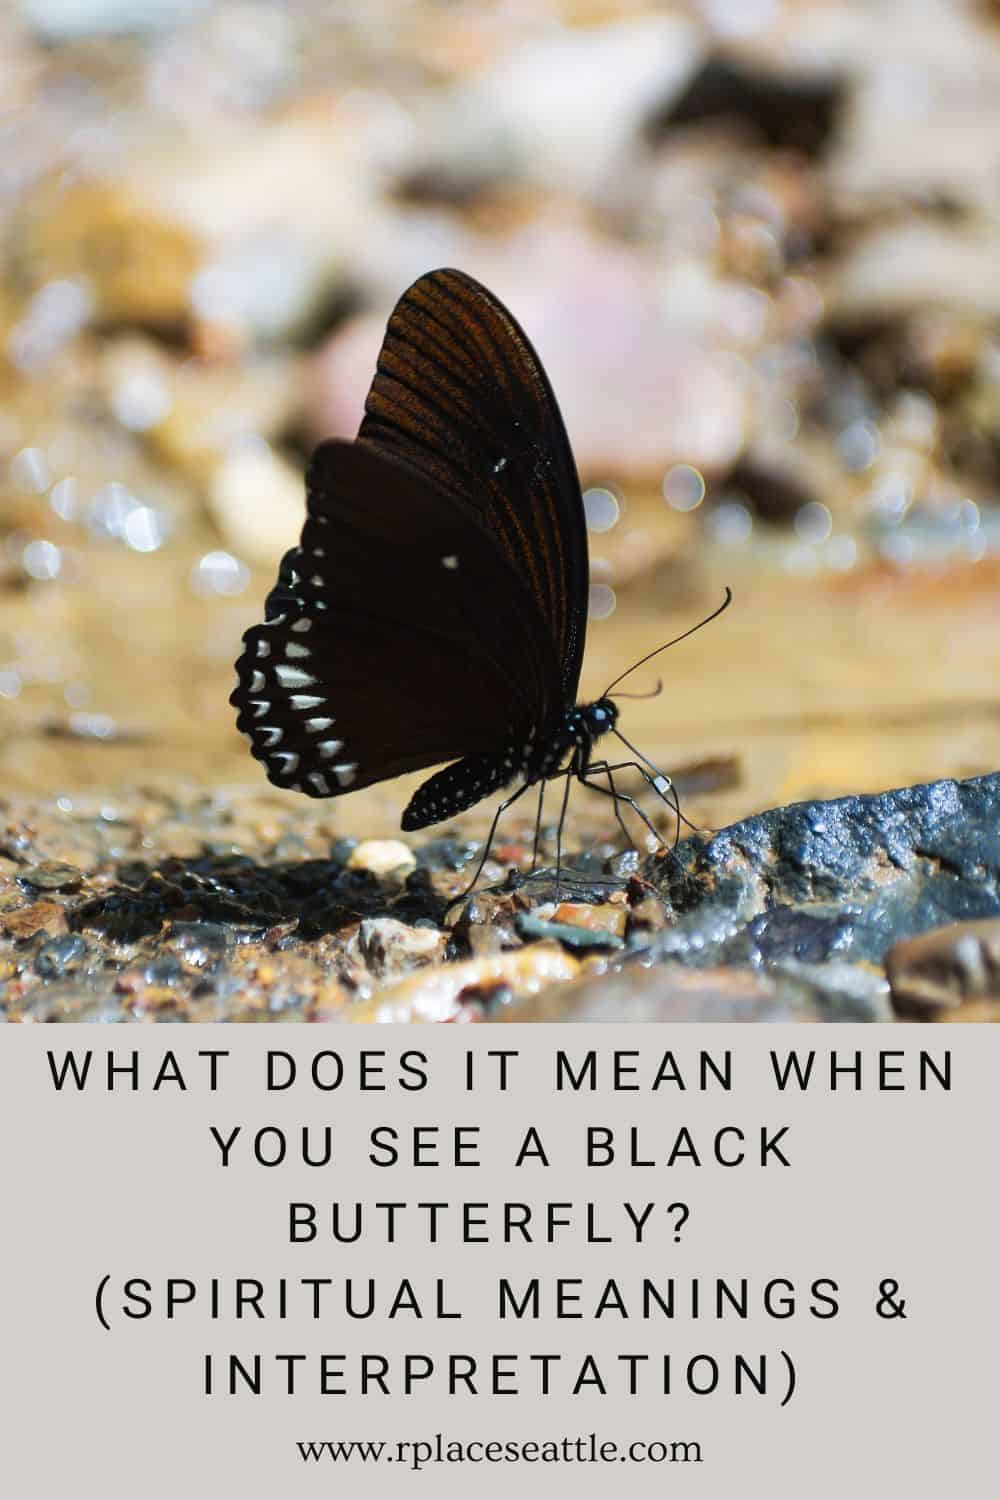 What Does It Mean When You See A Black Butterfly? (Spiritual Meanings & Interpretation)